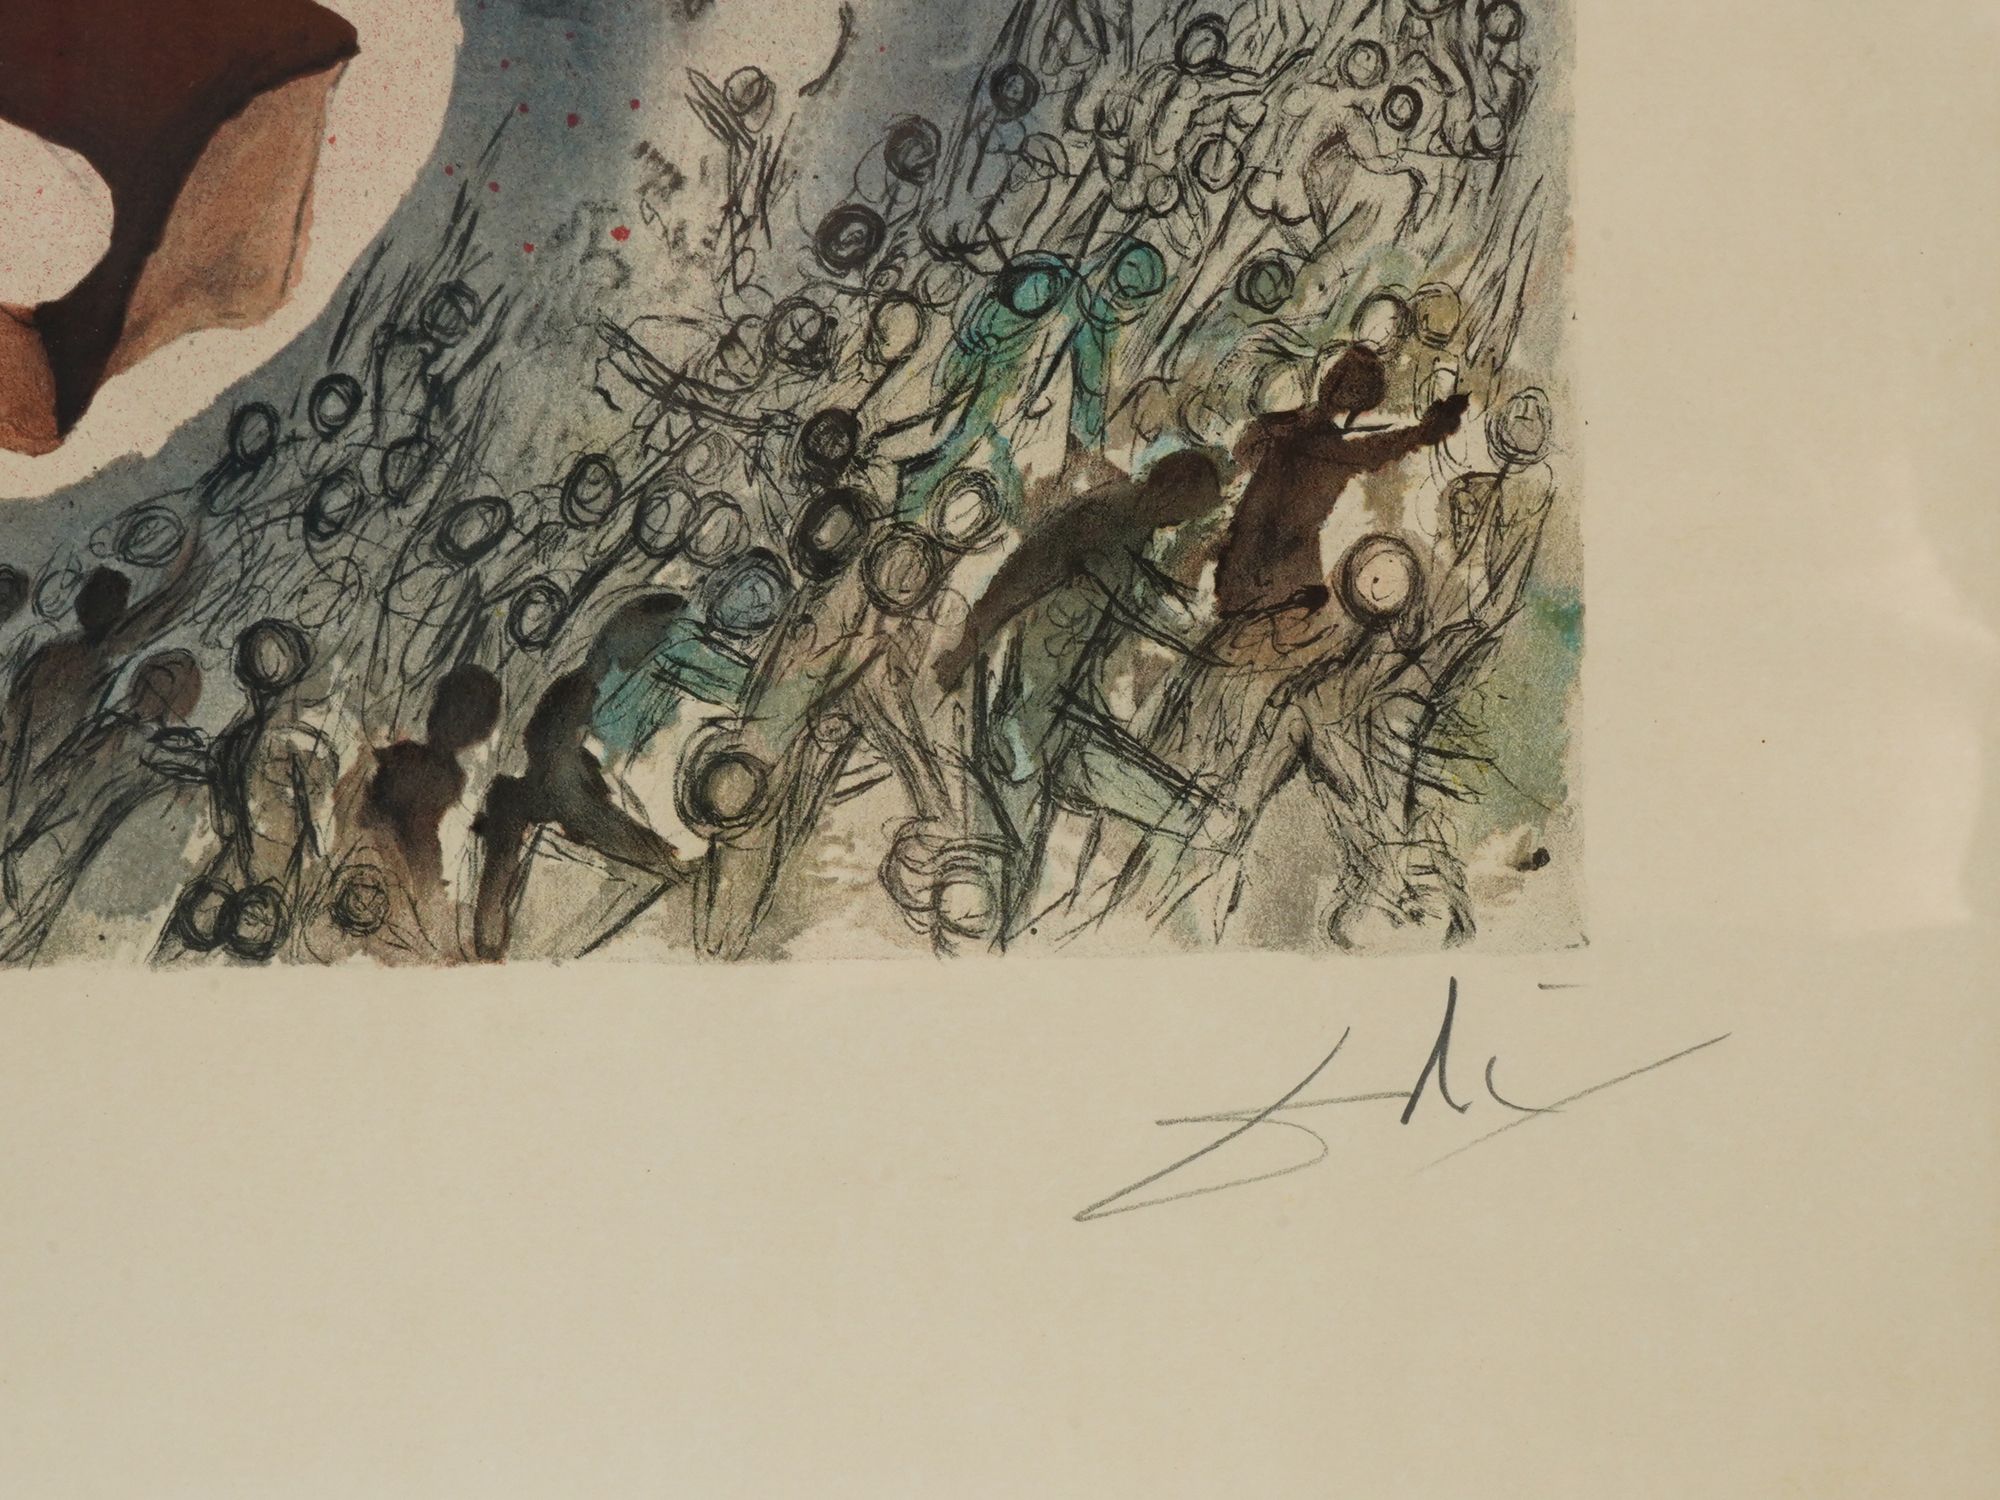 1968 LITHOGRAPH VALLEY OF SHADOW OF DEATH AFTER DALI PIC-2